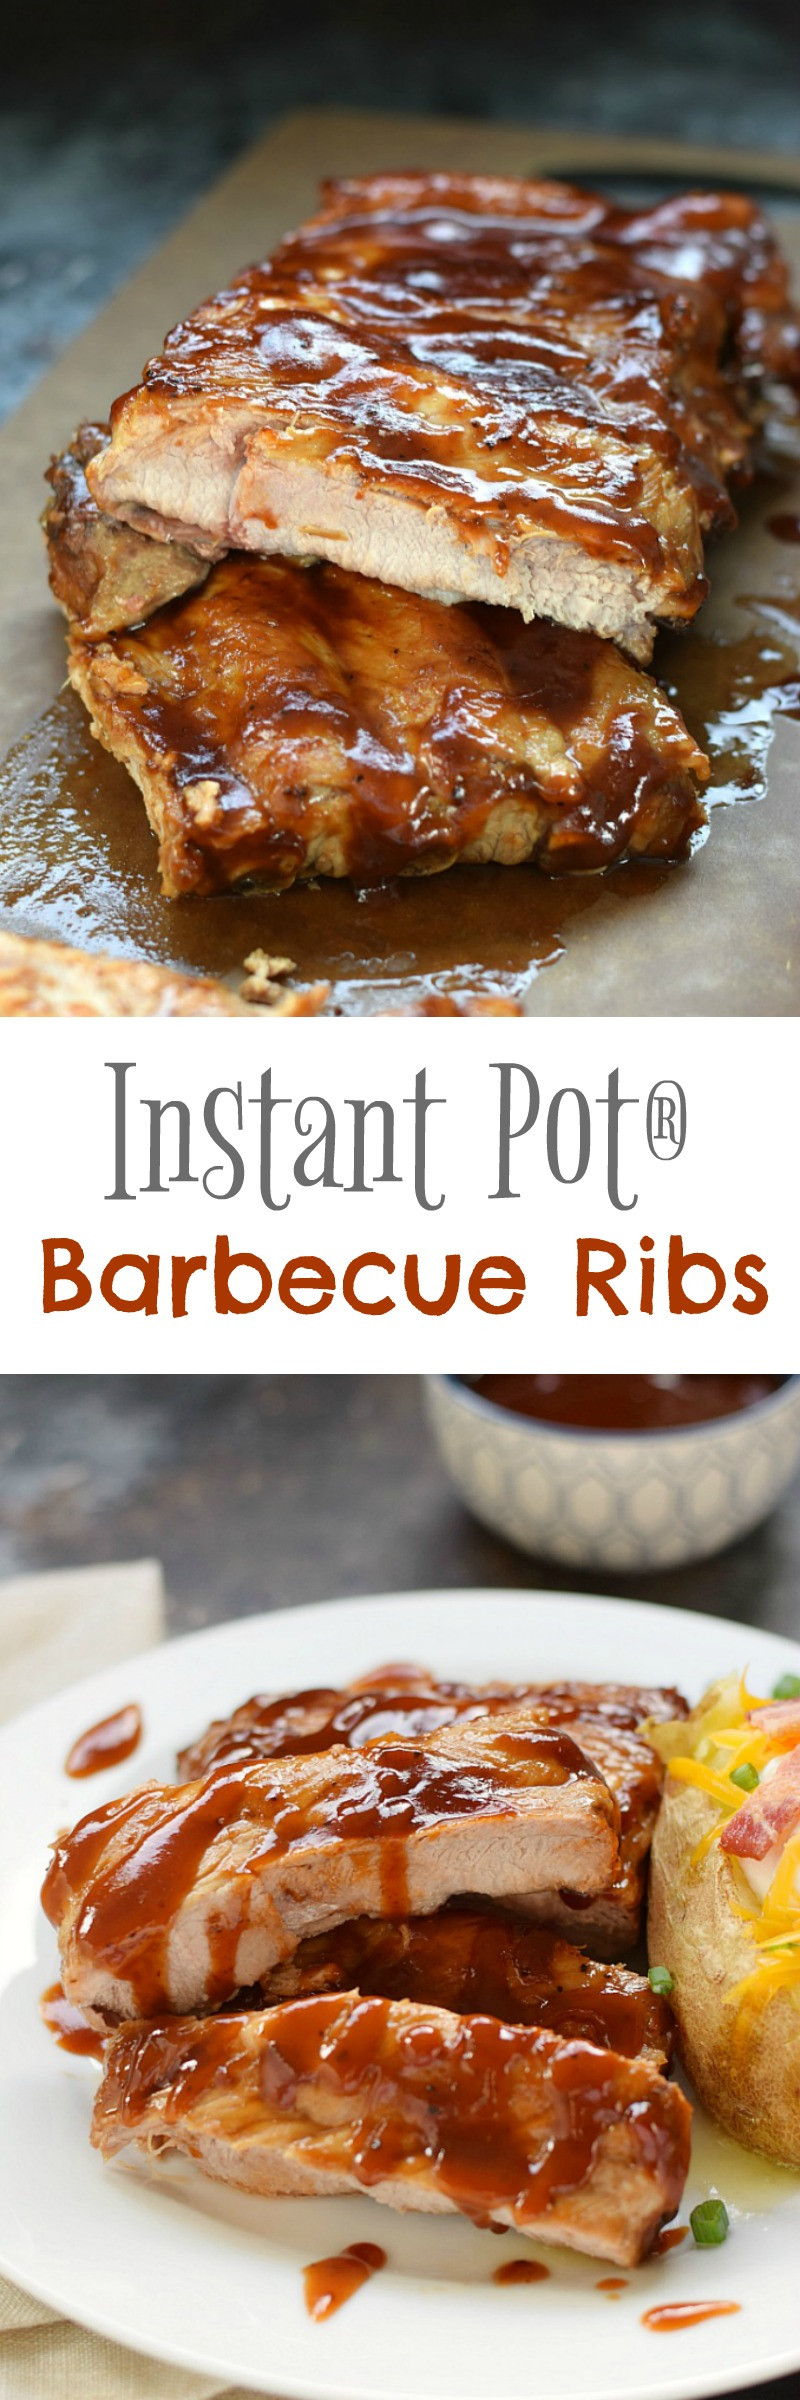 Instant Pot Bbq Pork Ribs
 Instant Pot Barbecue Ribs Cooking With Curls